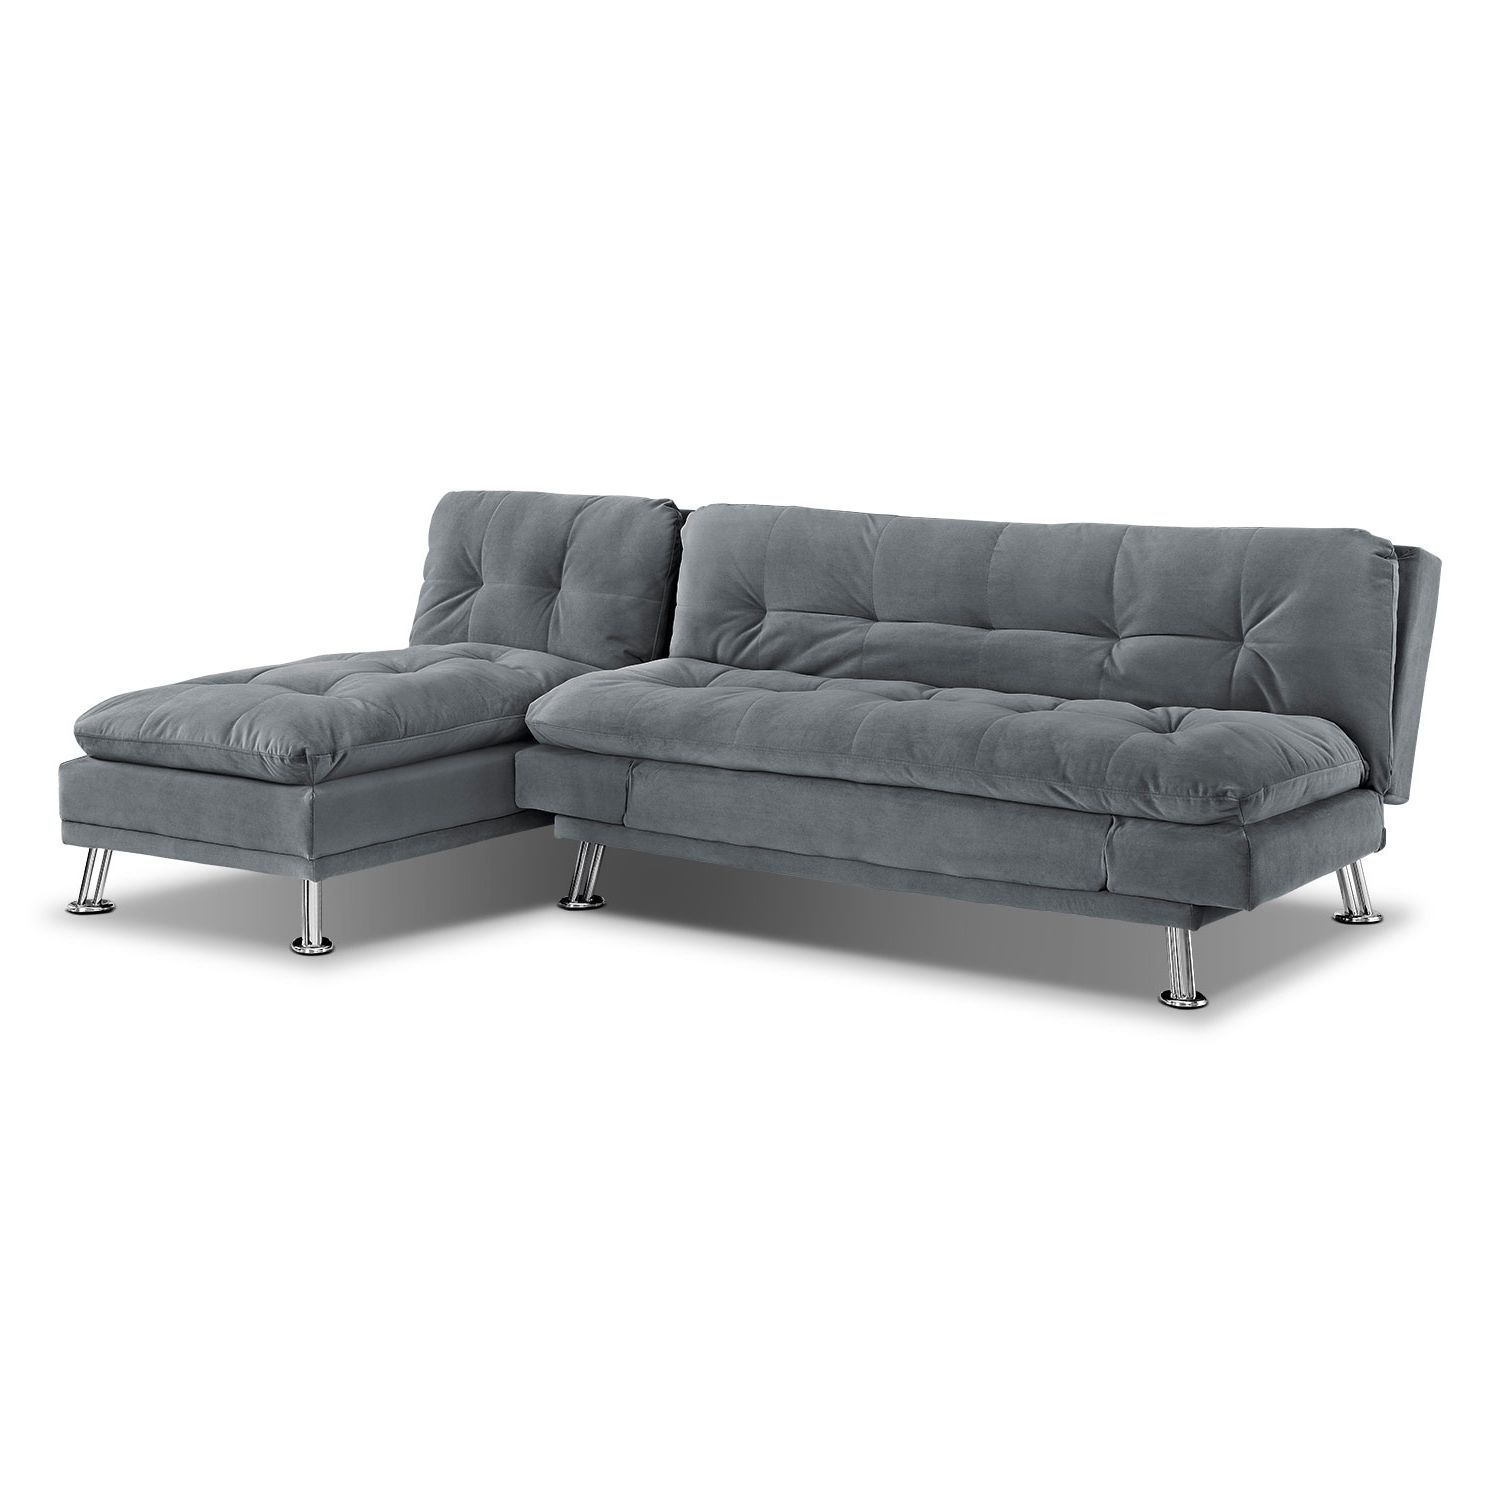 Fashionable Chaise Lounge Sofa Beds Pertaining To Sleeper Sofas (View 15 of 15)